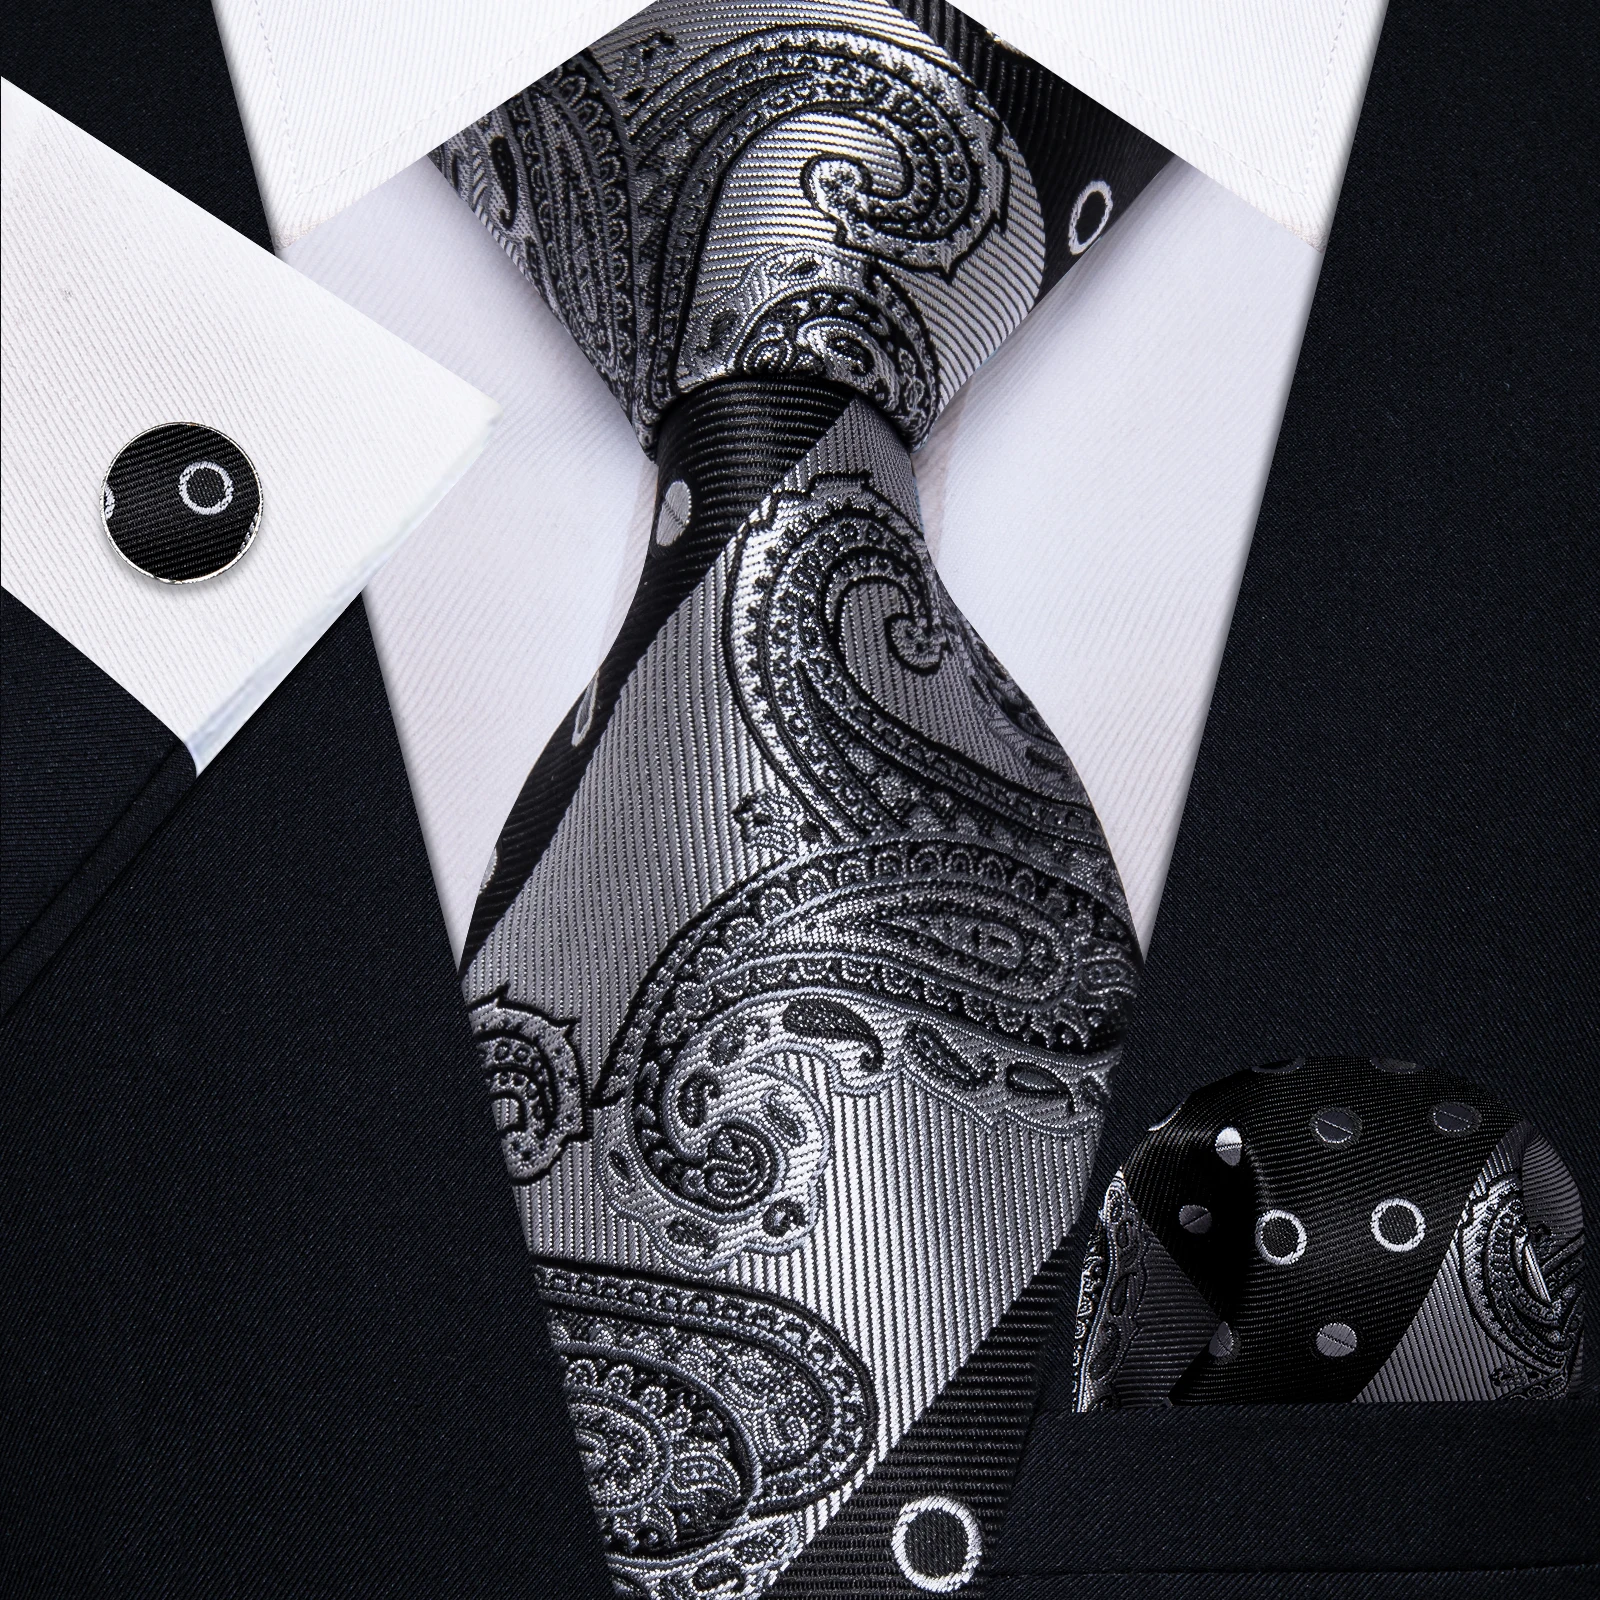 

Novalty Men's Black Dot Gray Jacquard Paisley Necktie for Wedding Party Dinner Classic Luxury Tie with Pocket Square Cufflinks